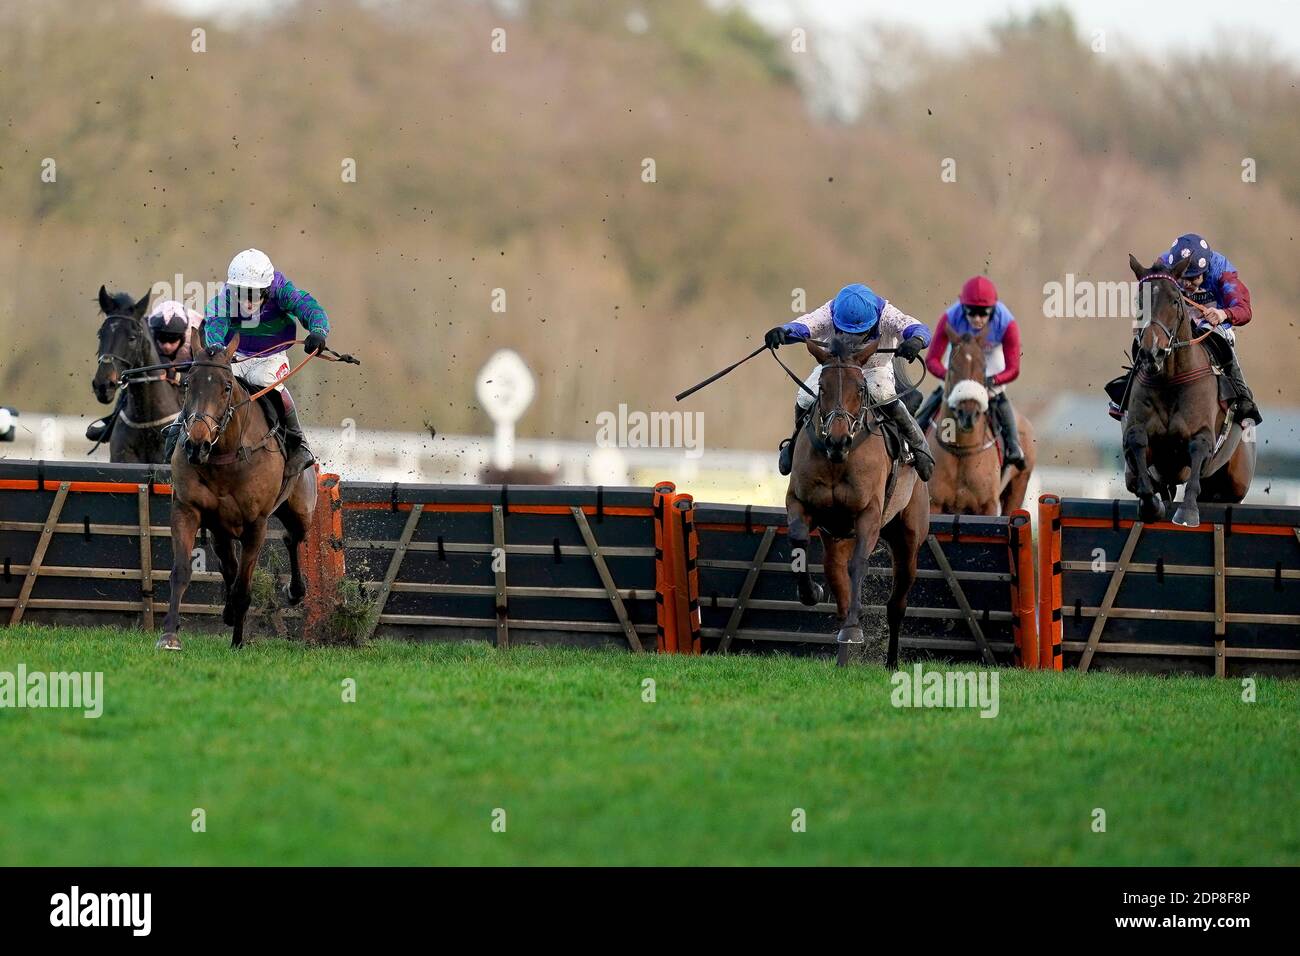 Aidan Coleman riding Paisley Park (right, spotted cap) clear the last to win The Porsche Long Walk Hurdle from Richard Johnson and Thyme Hill (left, white cap) during the Saturday of the December Racing Weekend at Ascot Racecourse. Stock Photo